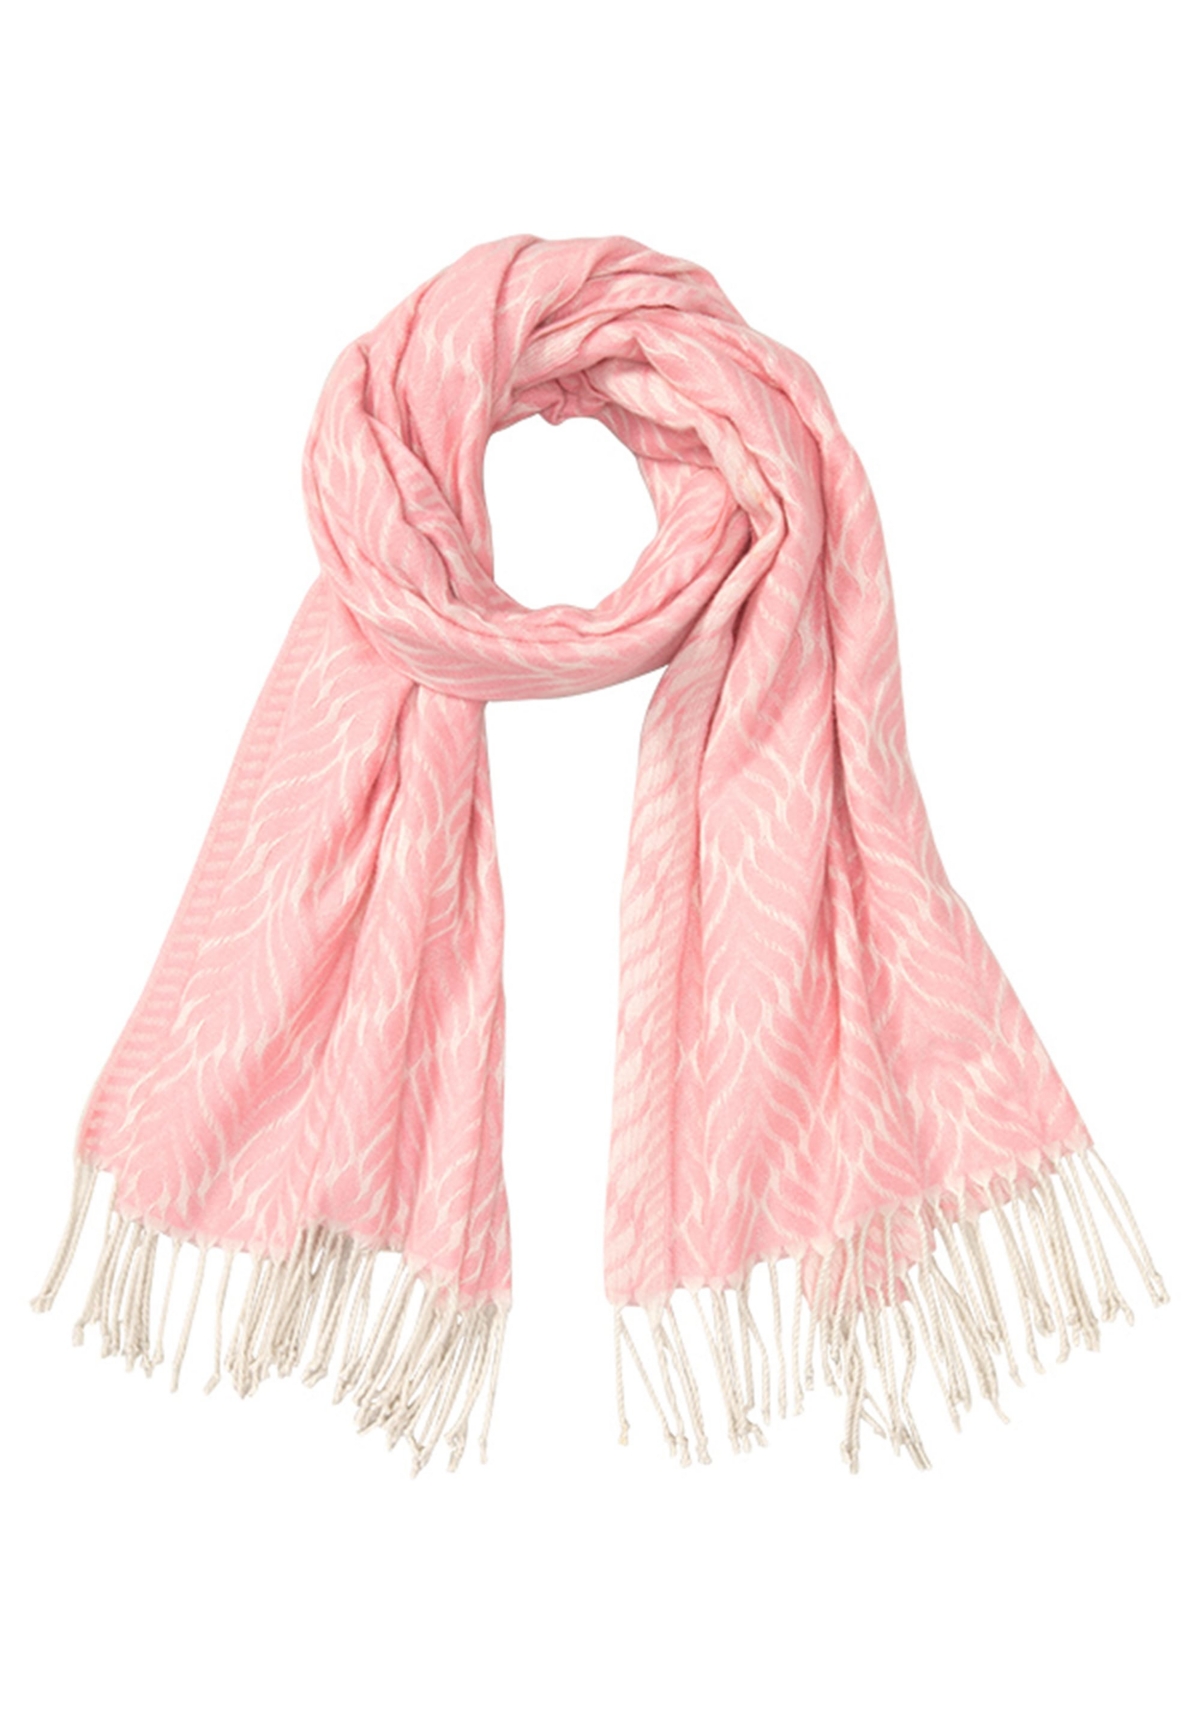 Pattern Scarf with Fringe Trim - Pink icing